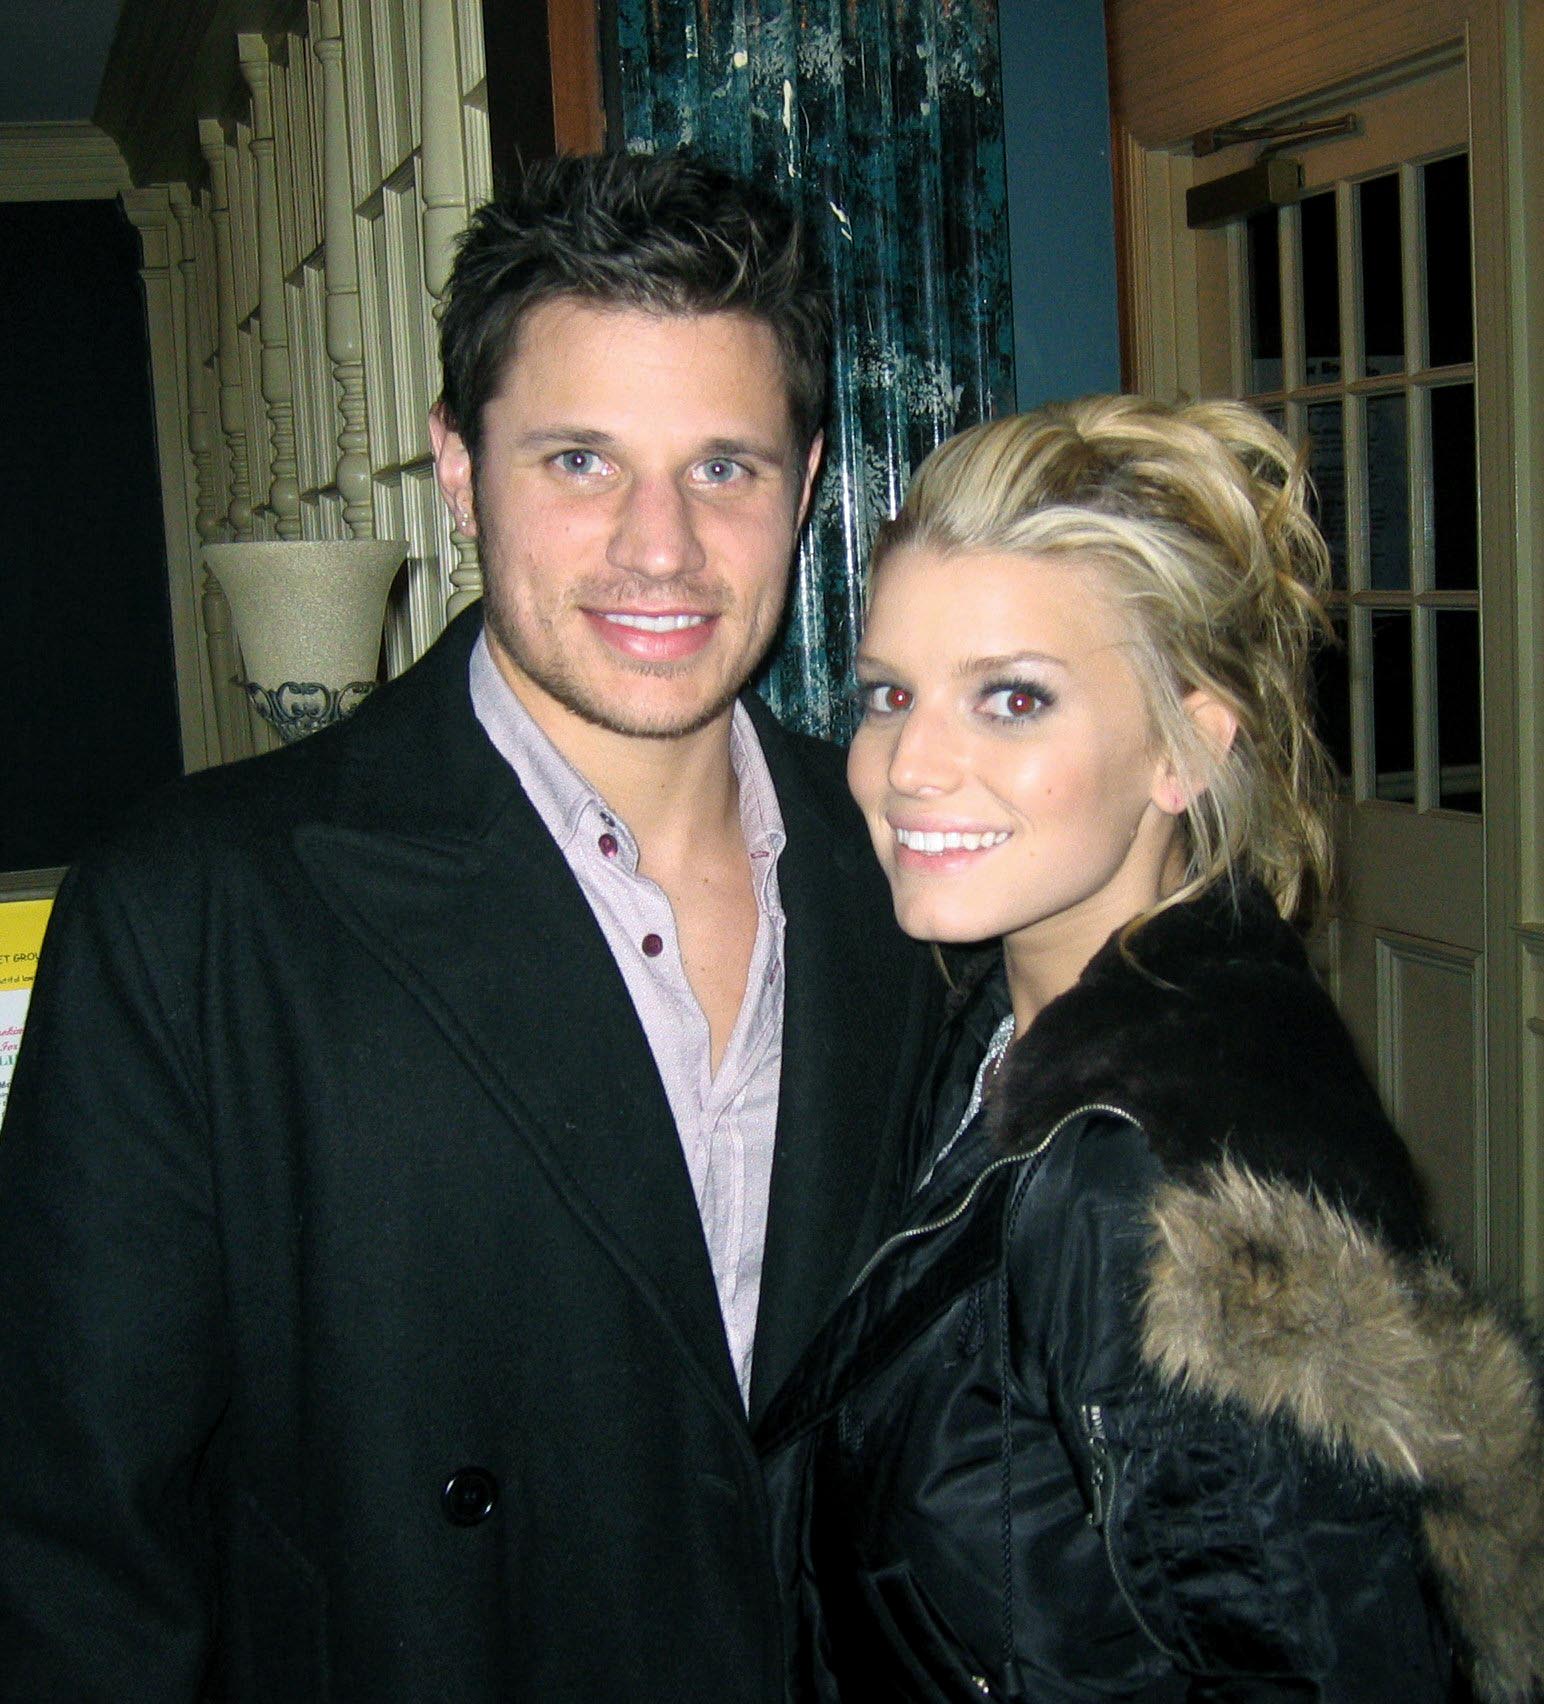 Nick Lachey weighs in on ex-wife Jessica Simpson's bestselling